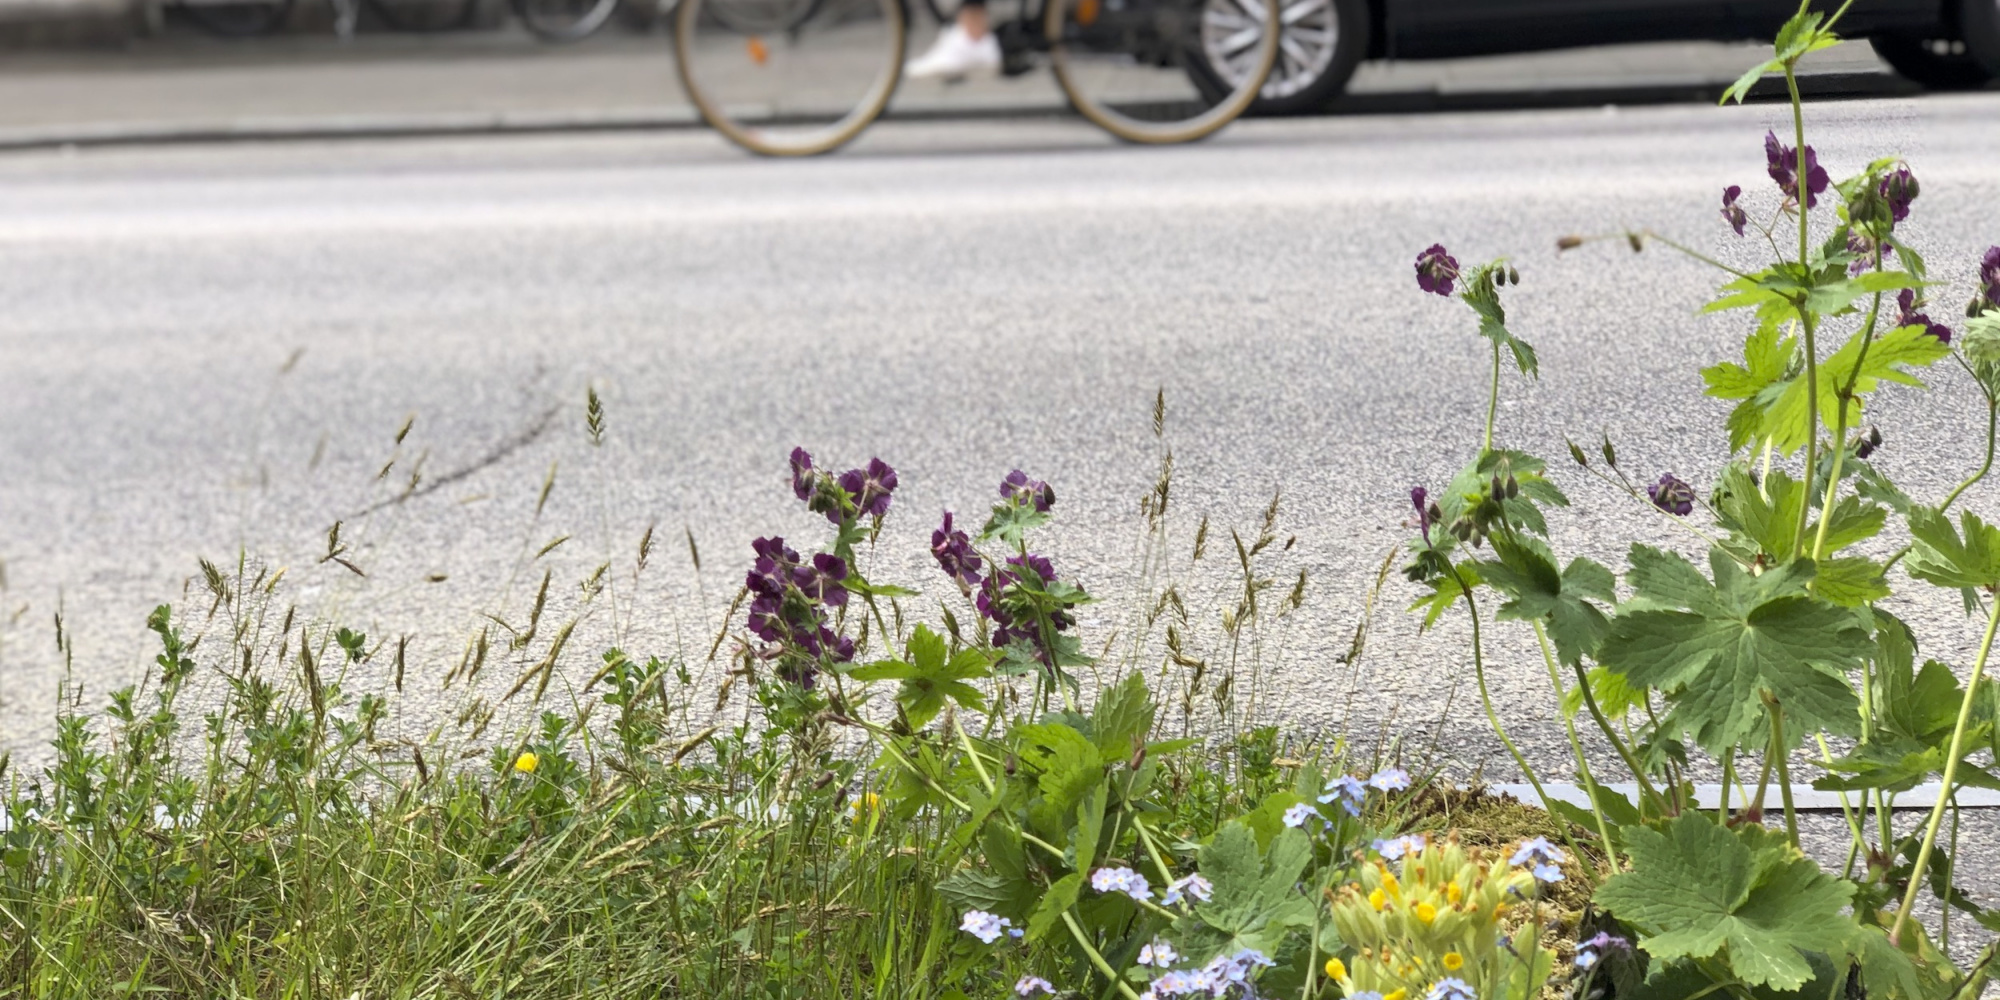 Grass and plants in the foreground with asphalt road with a bike and car in the background